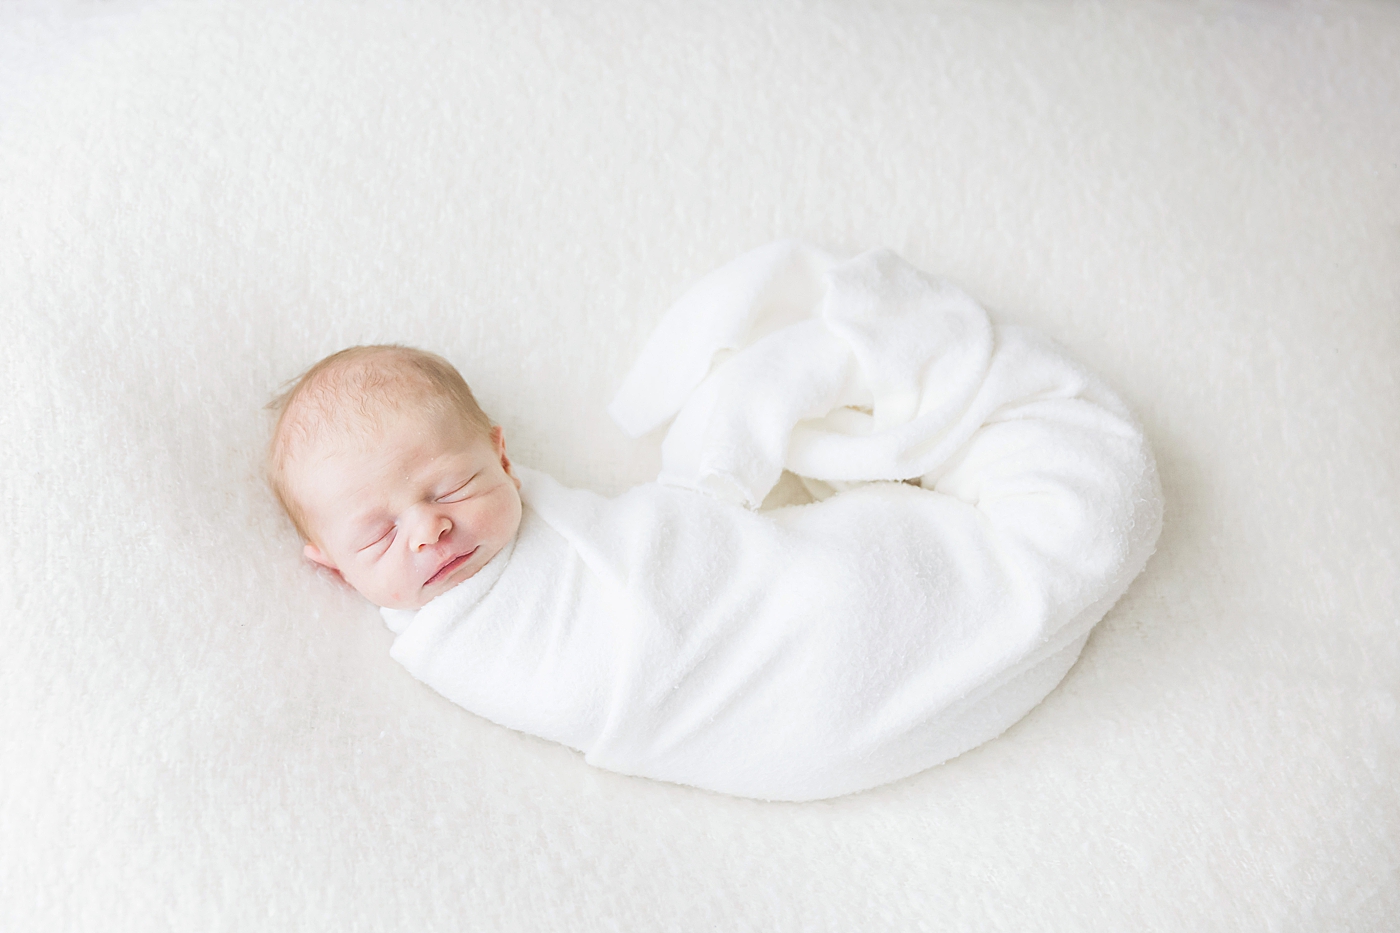 Baby boy sleeping for newborn session. Photo by Fresh Light Photography.